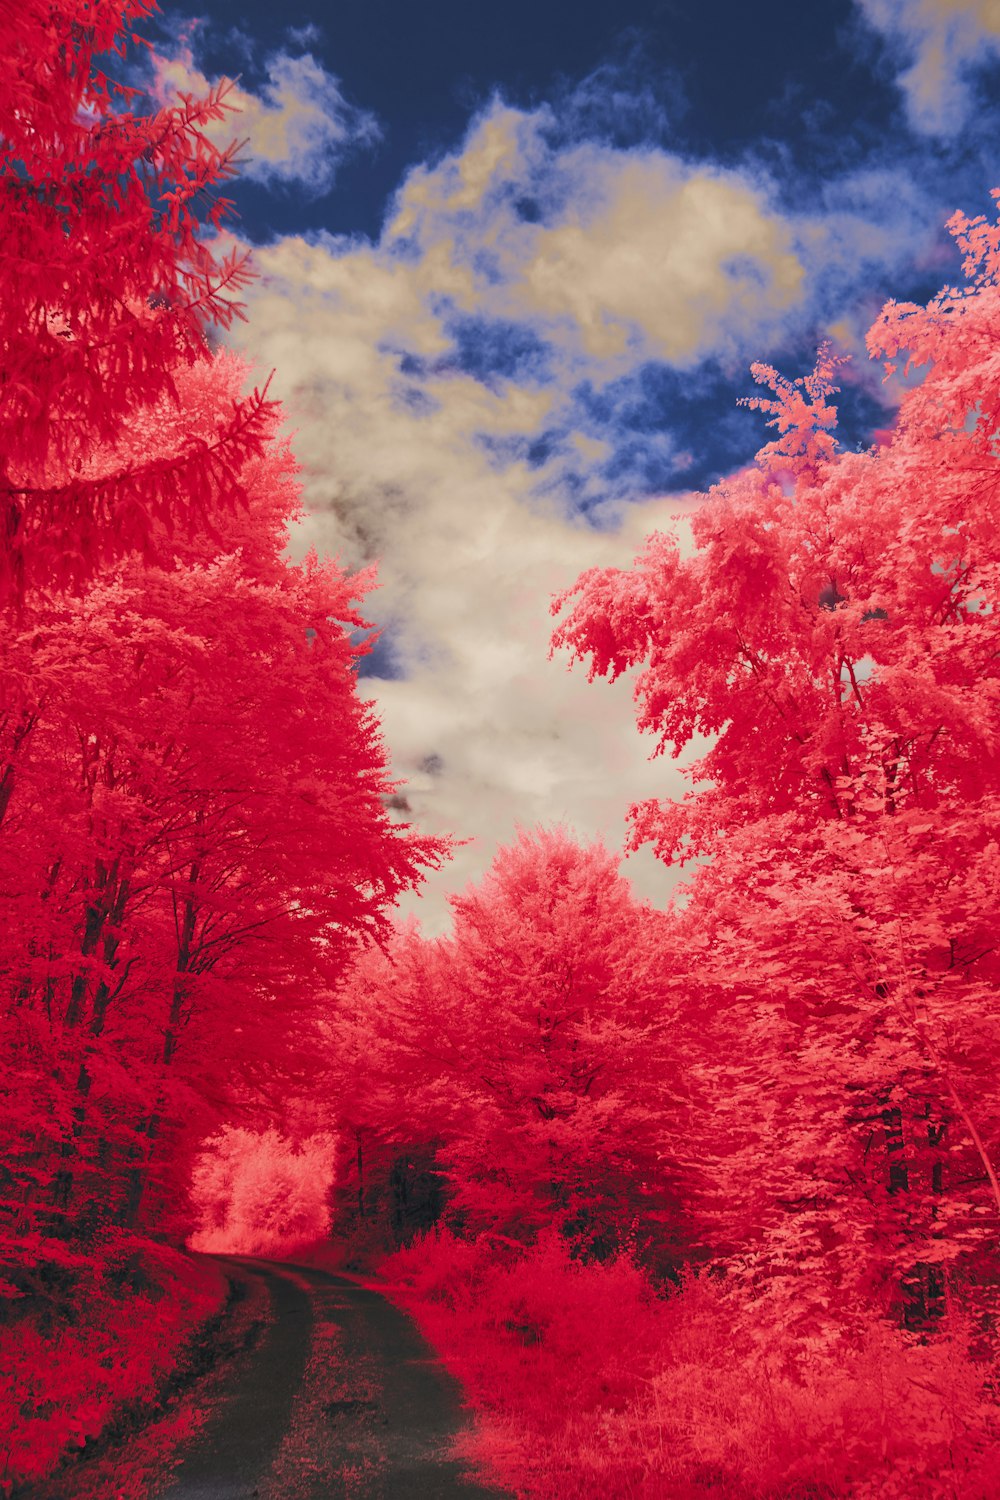 red leaf trees under cloudy sky